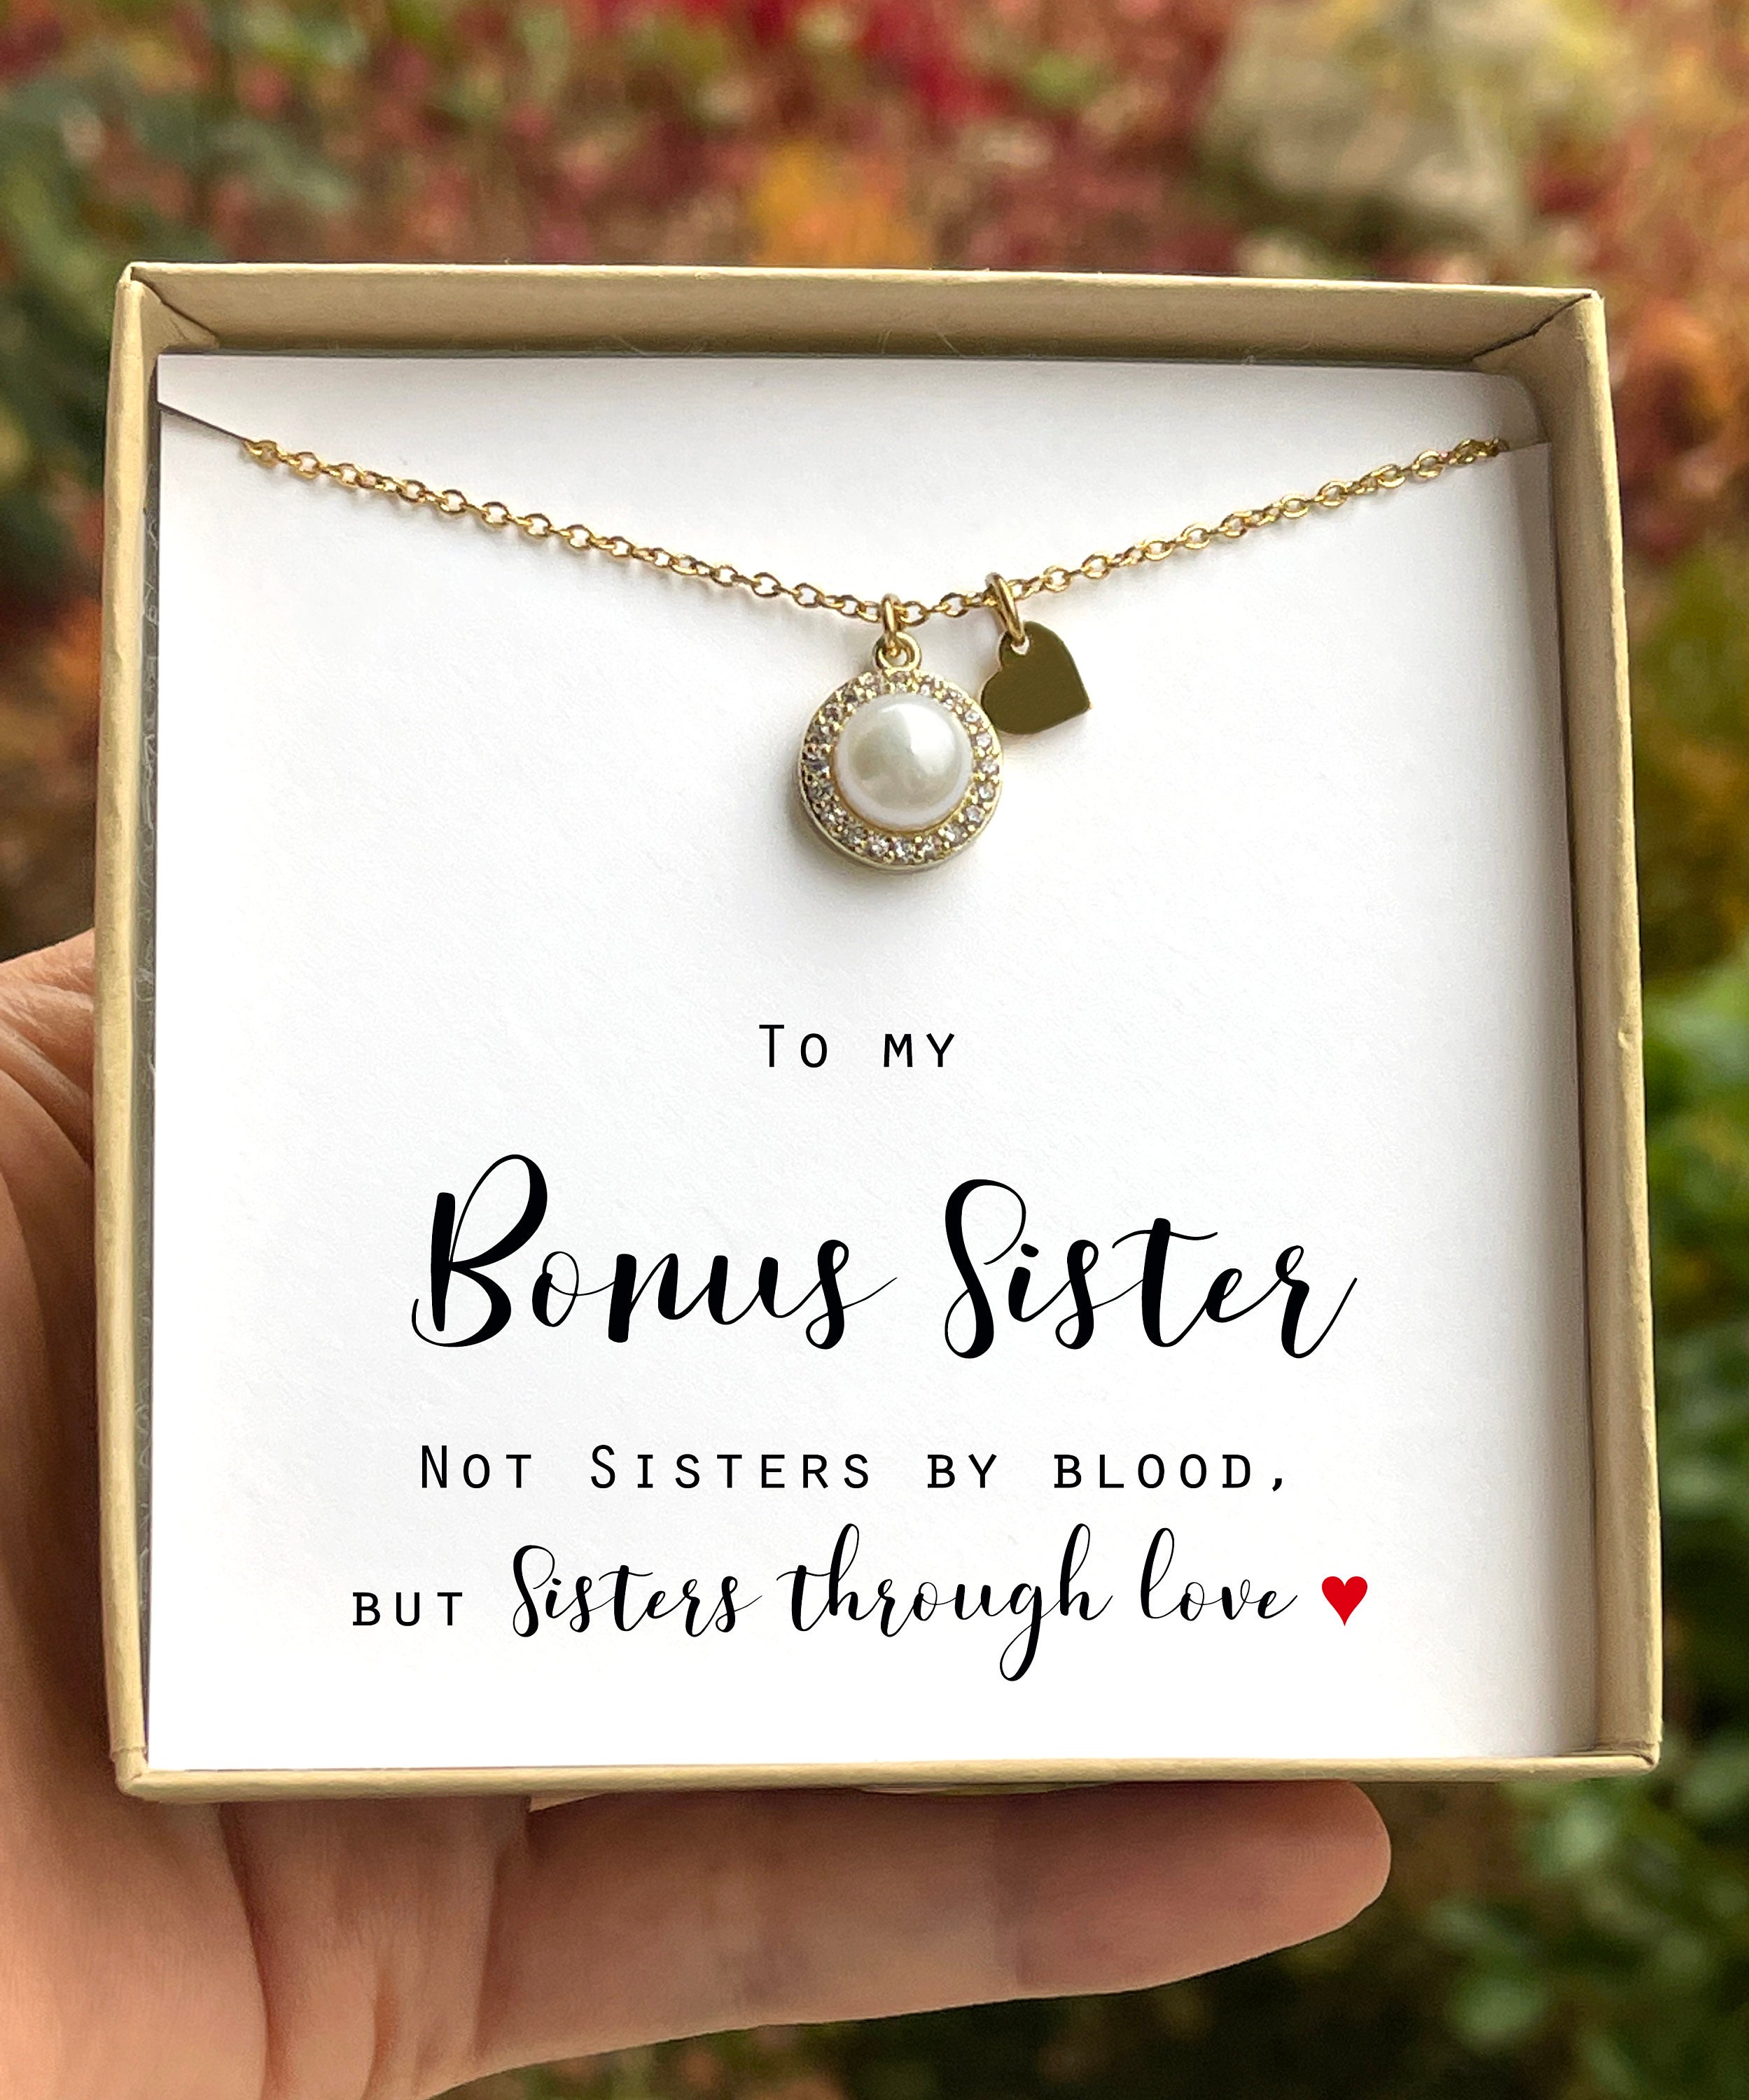 Wedding Gift for Bride from Sister in Law Bride Gift from Sister in Law Gift for Bride from Sister in Law - Silver + White Pearl No Name, Just Poem